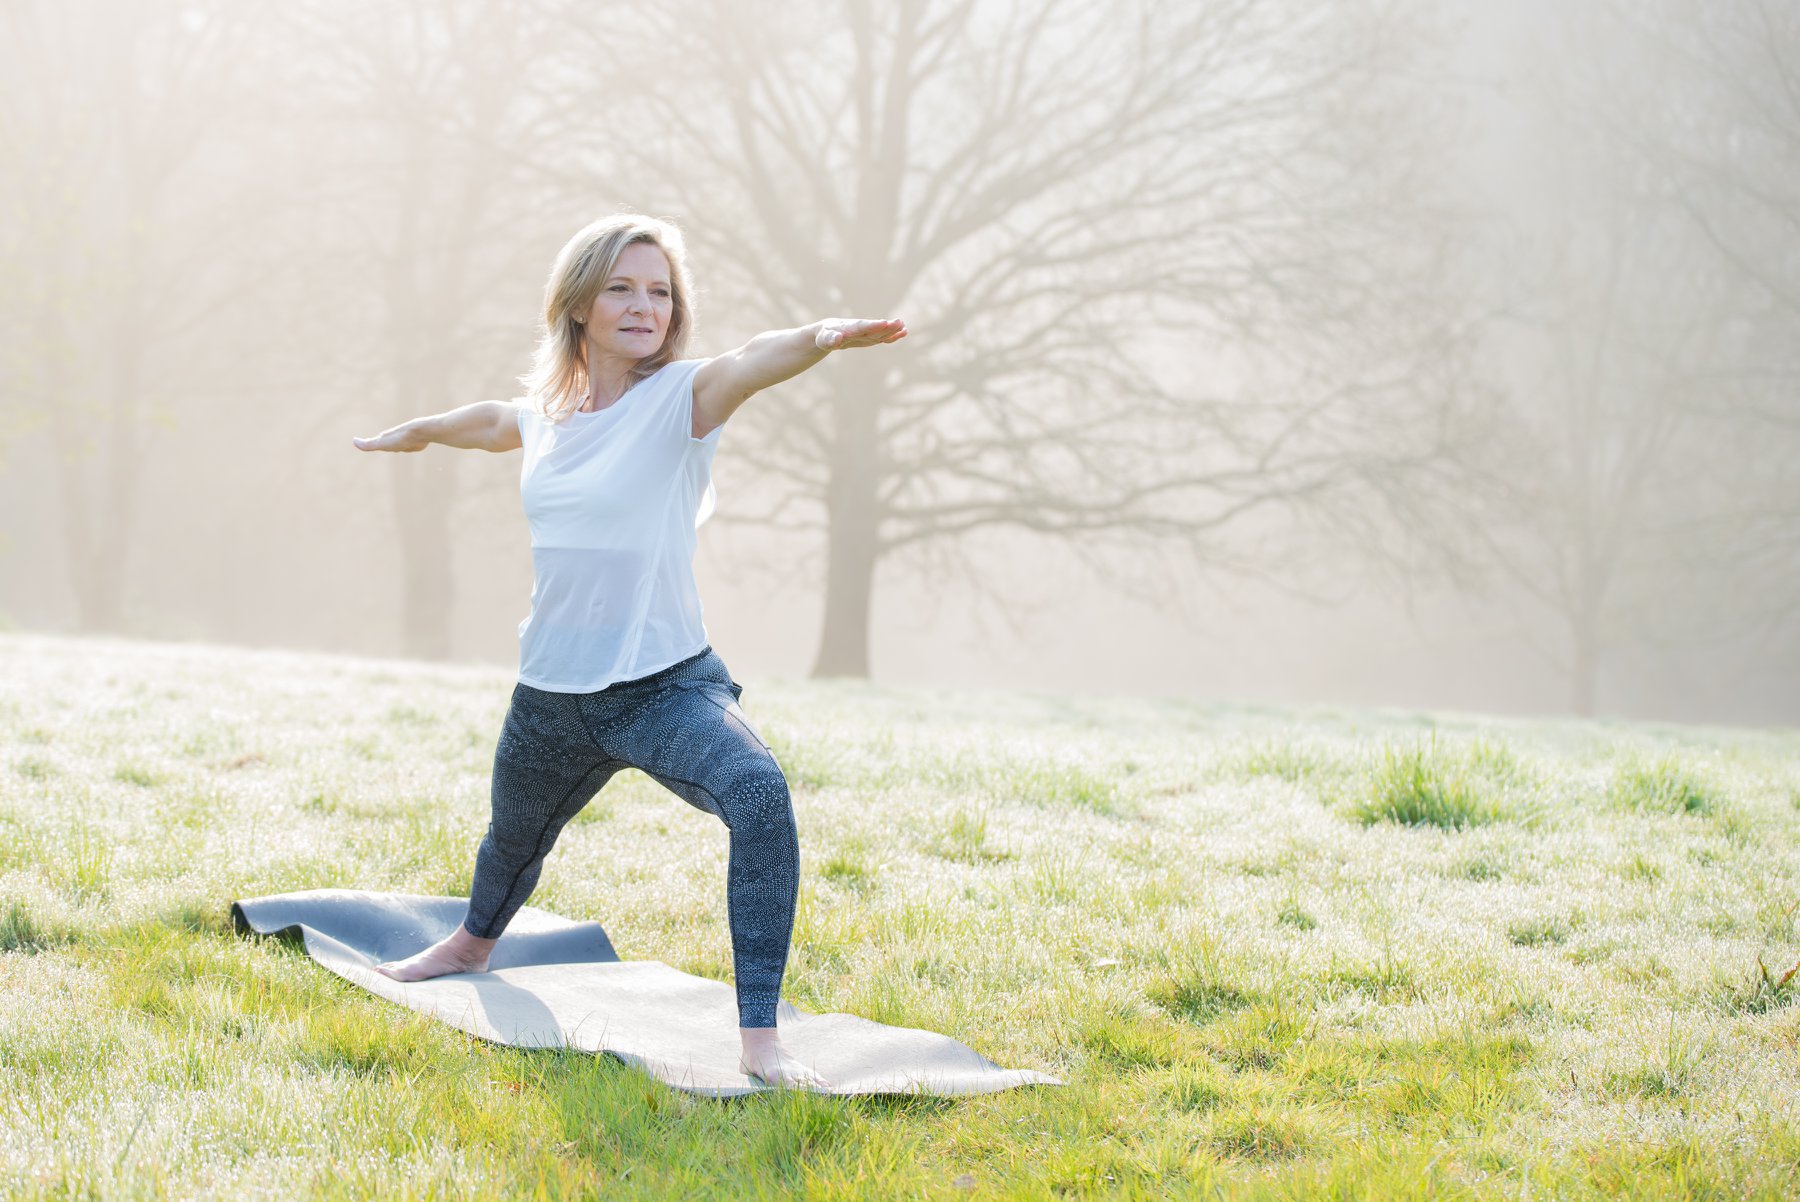 Yoga at Bedgebury Wellbeing spa and retreat in the high weald of Kent.